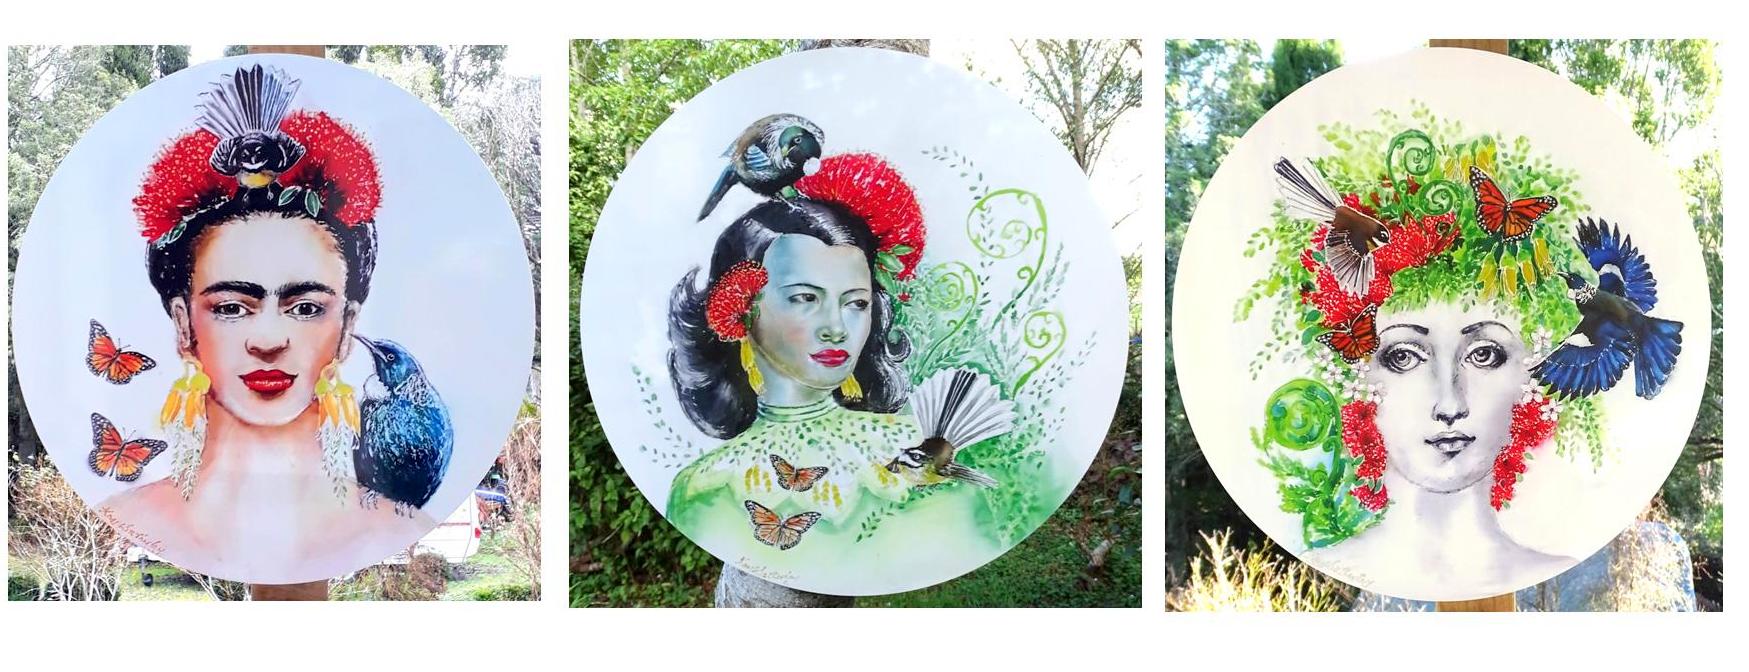 Special: A Trio of Portraits with Kiwiana, Three Ladies in Art Frida, Fornasetti, Green Girl  - Outdoor Garden Art Panels